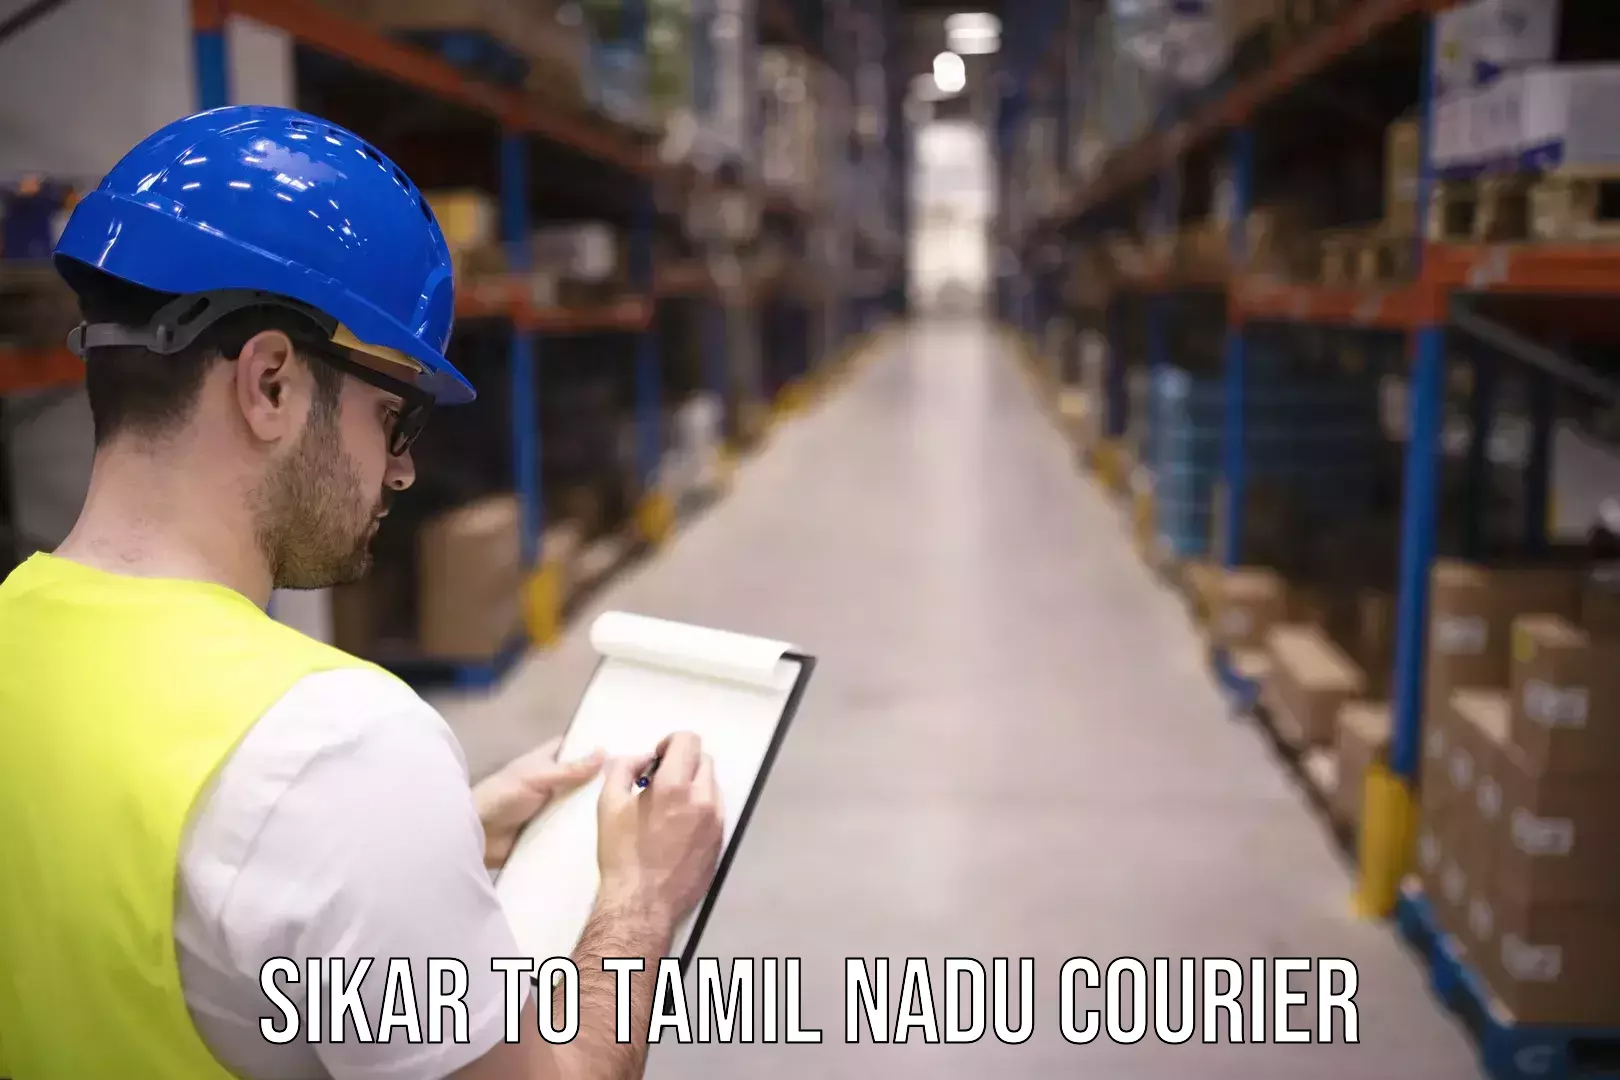 Easy access courier services Sikar to Perambalur